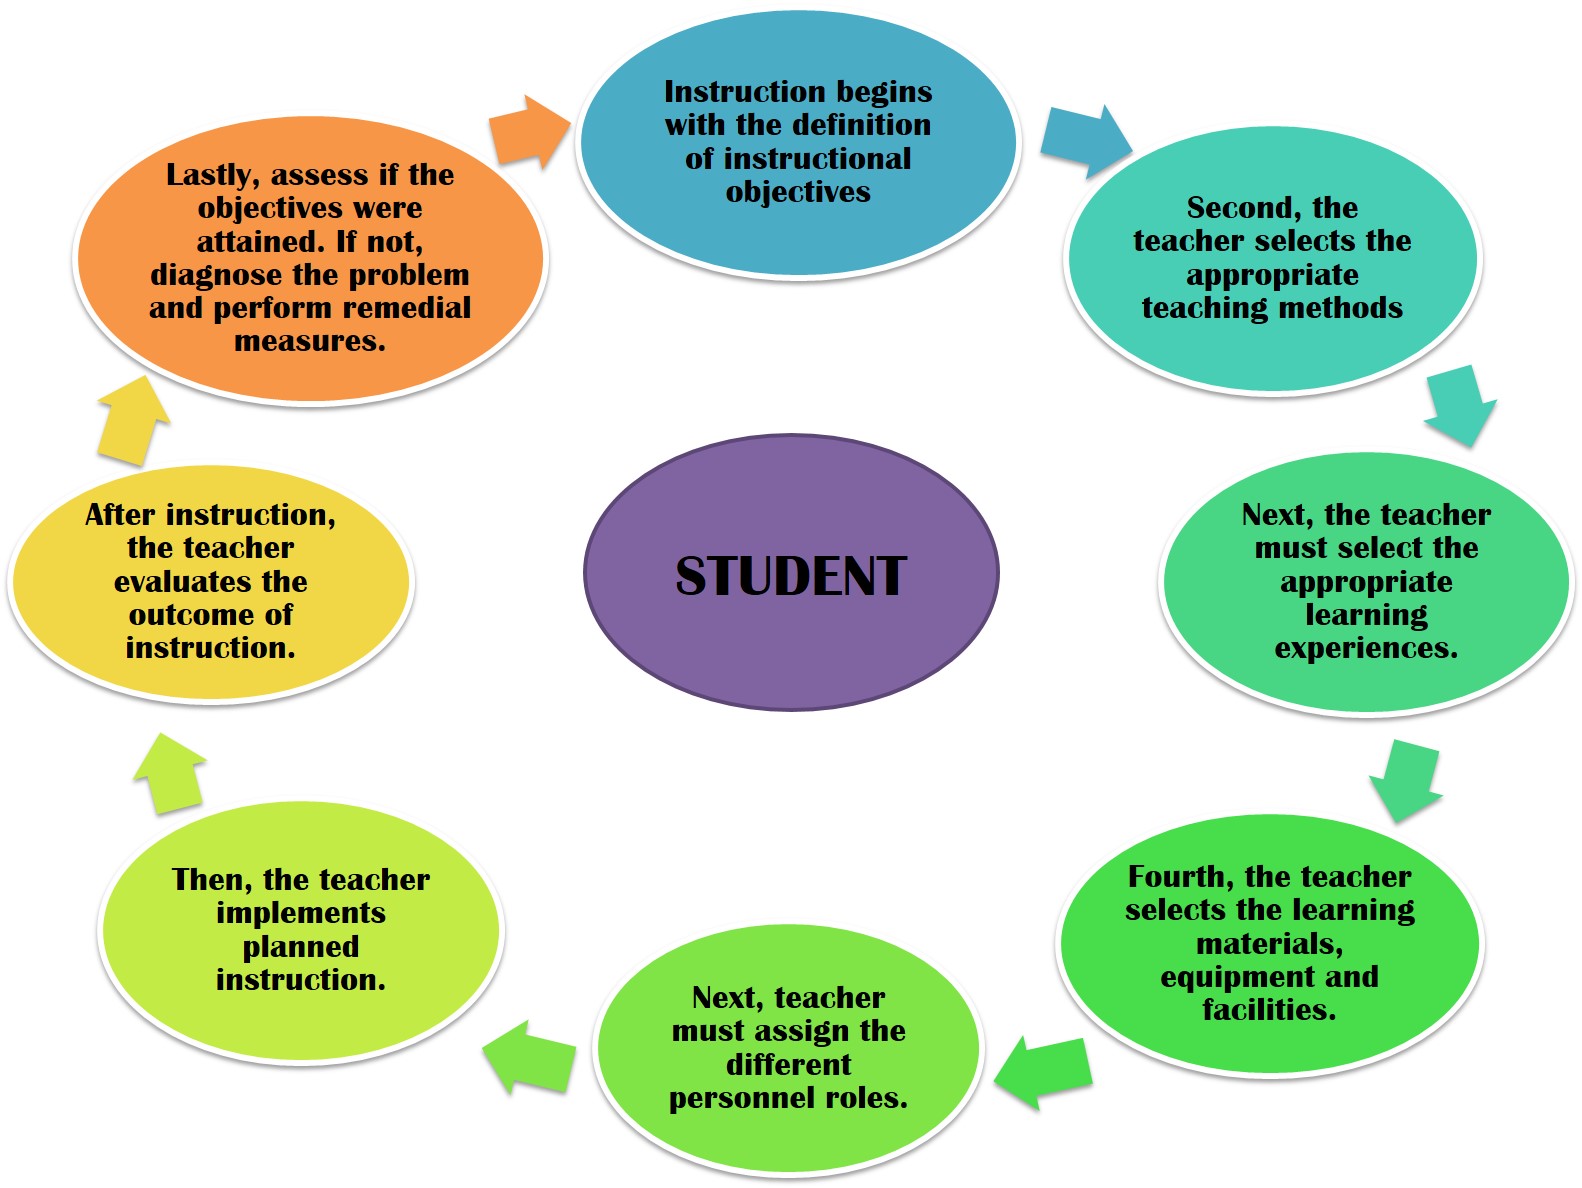 what is systematic approach to teaching